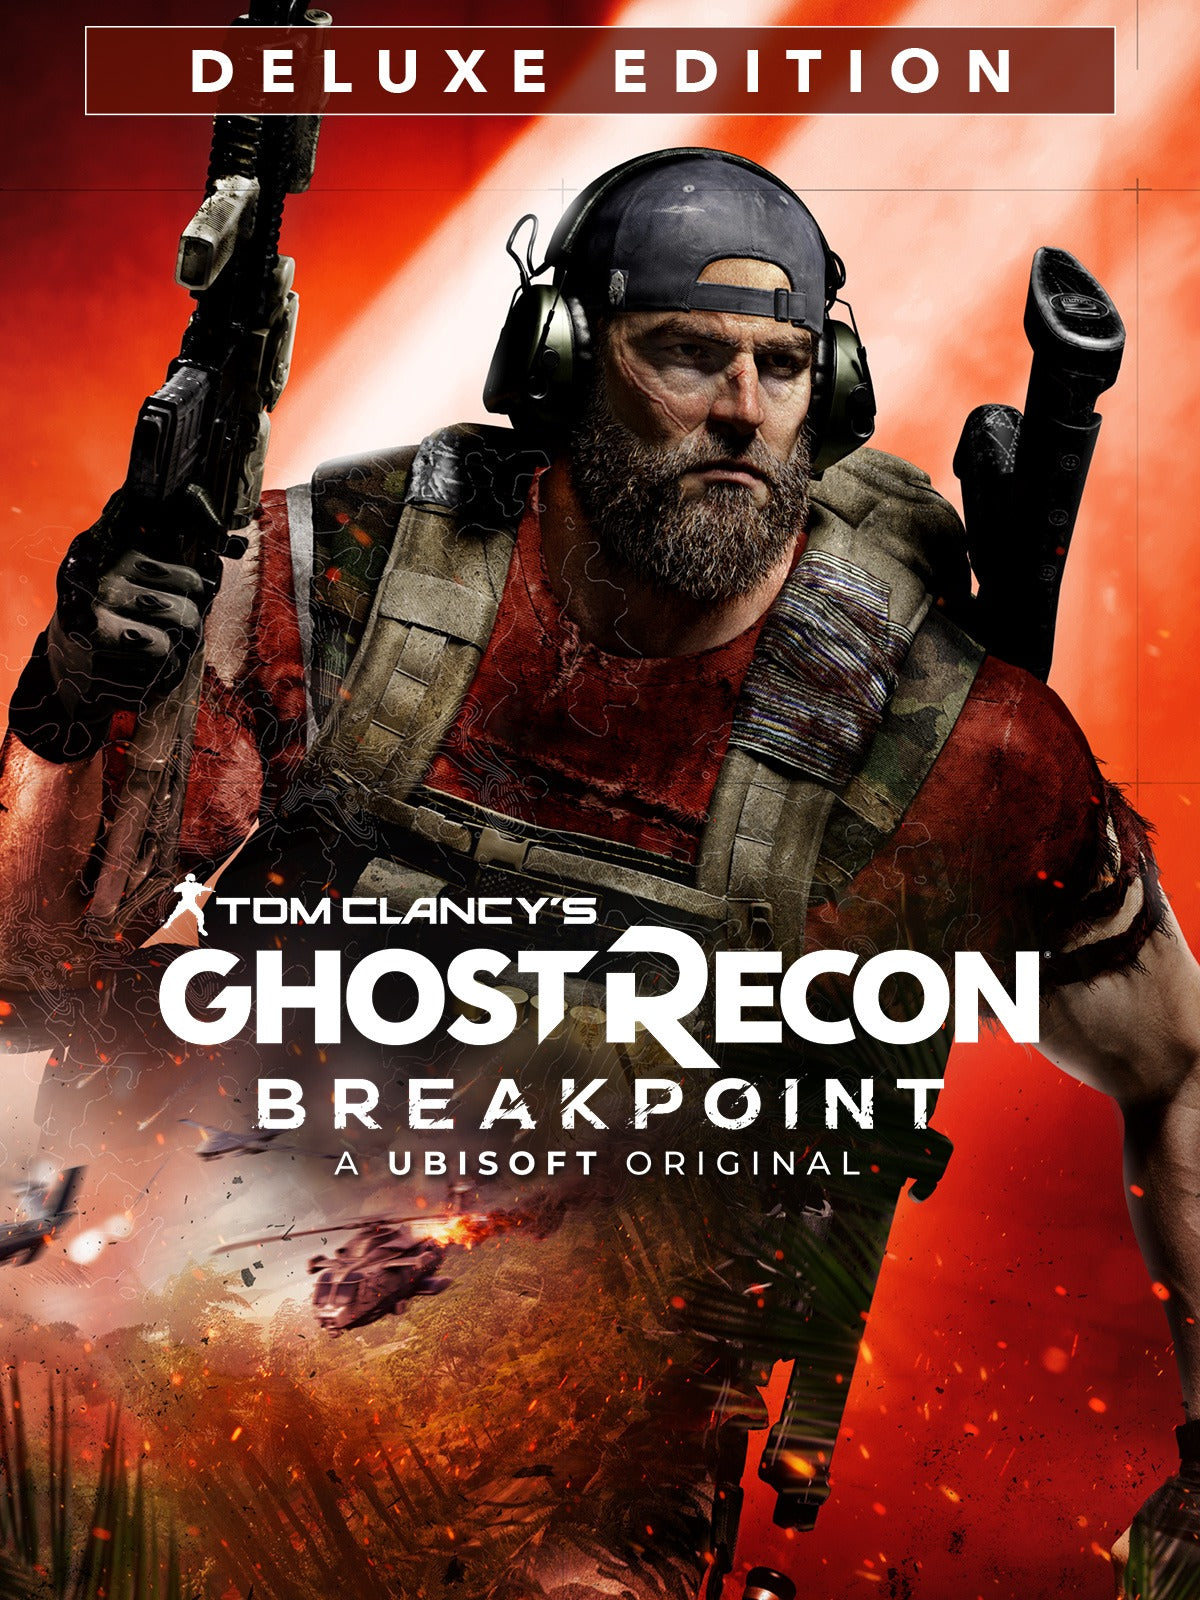 Tom Clancy's Ghost Recon Breakpoint (Deluxe Edition) - Xbox